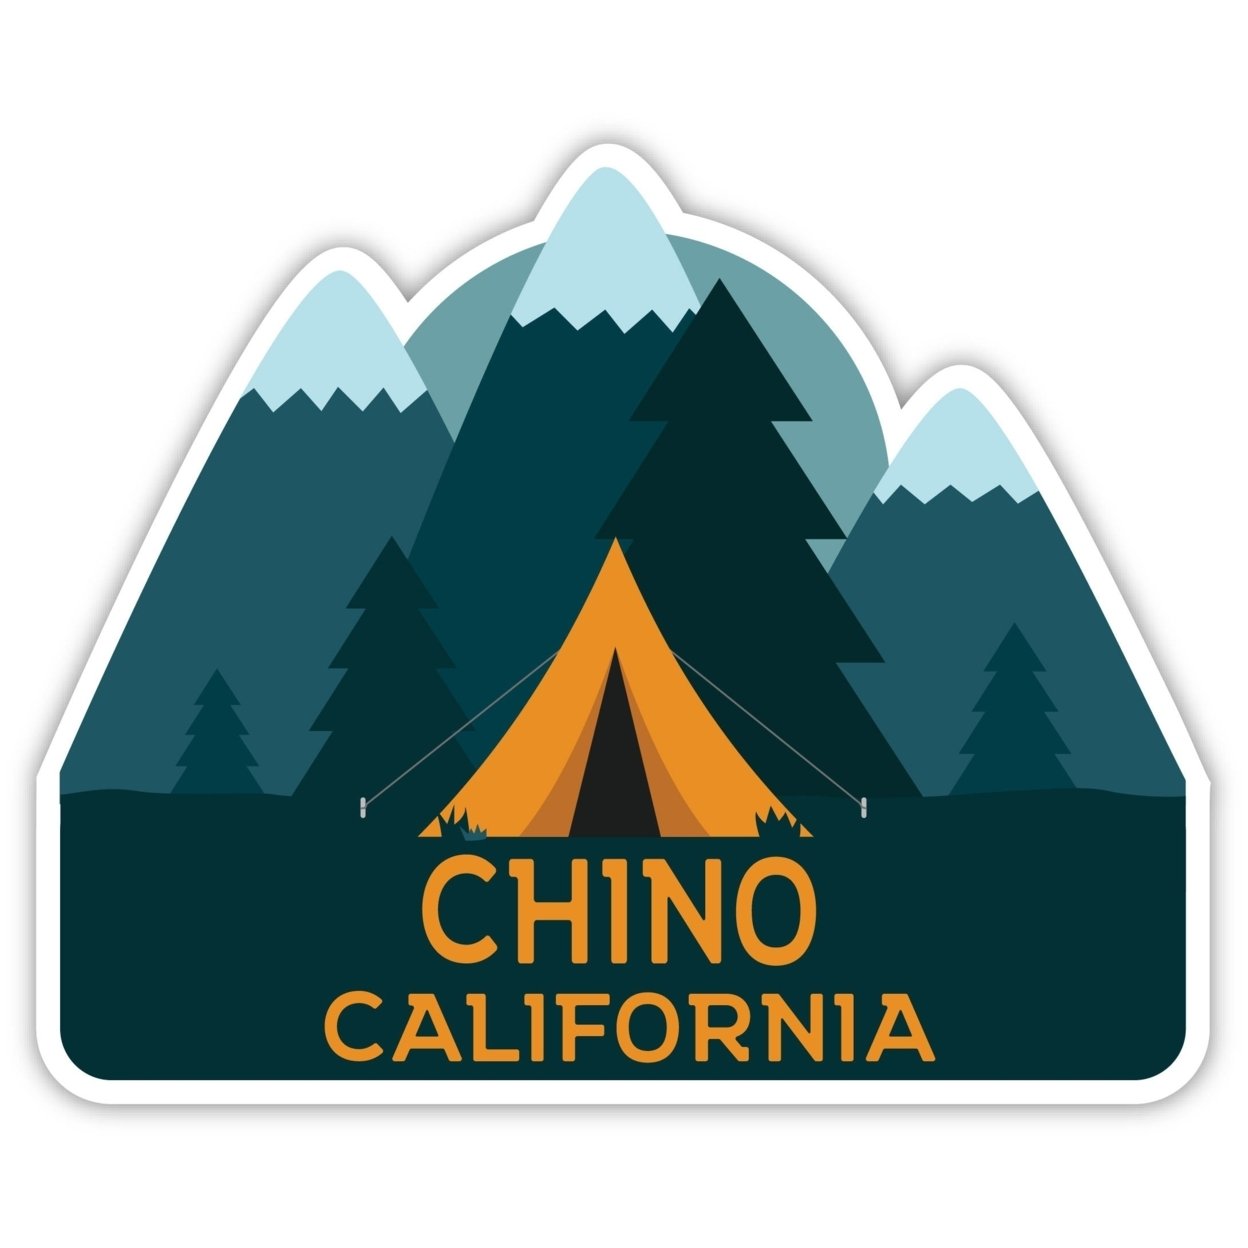 Chino California Souvenir Decorative Stickers (Choose Theme And Size) - 4-Pack, 10-Inch, Tent